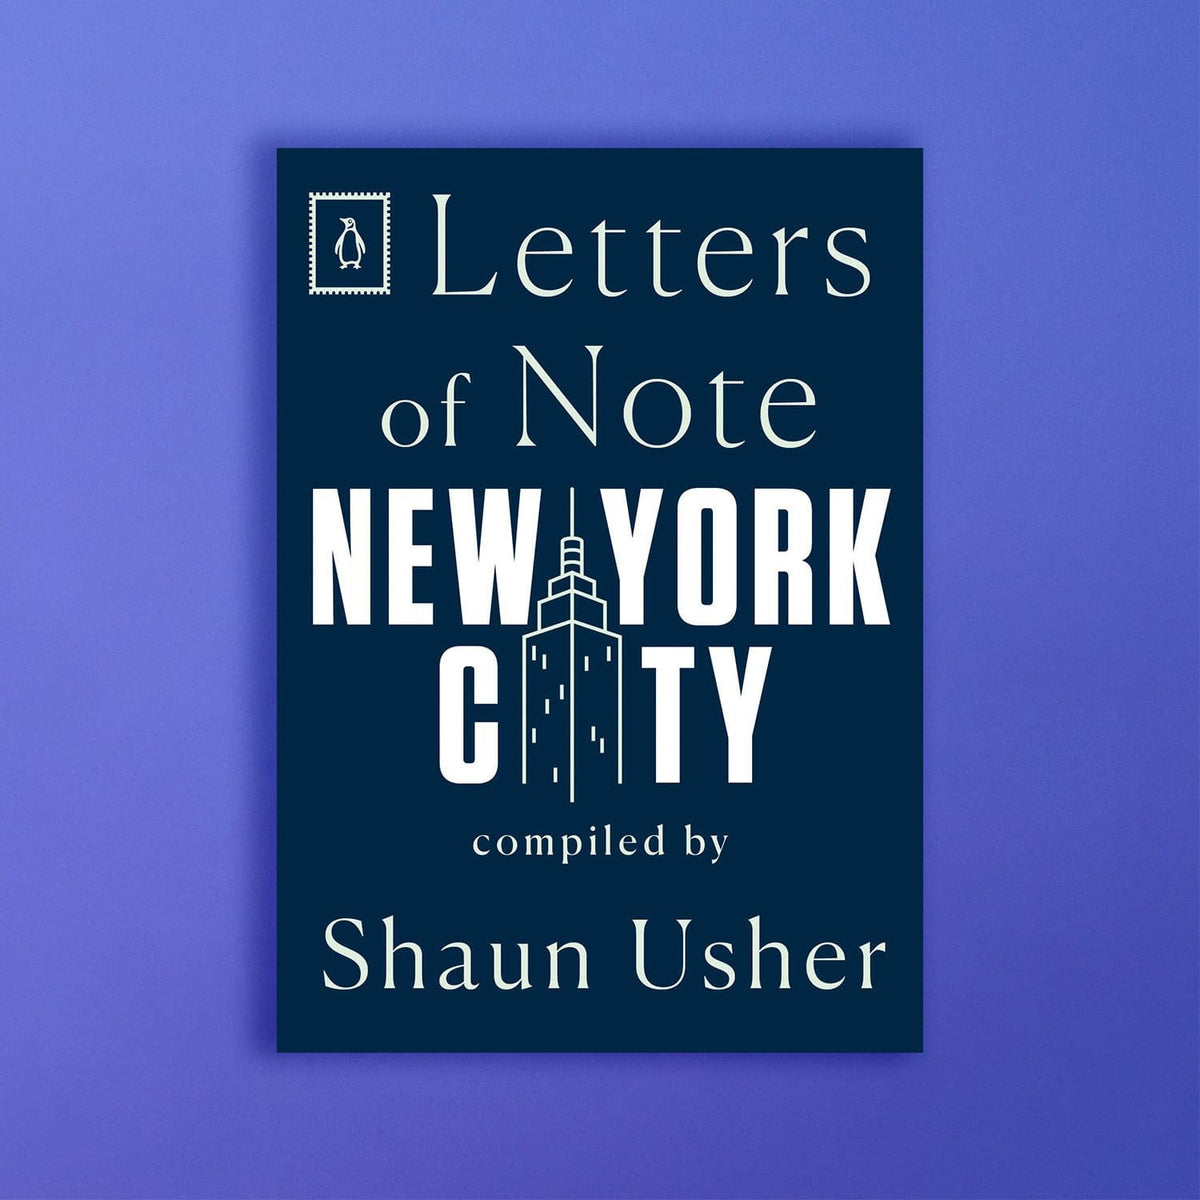 Letters of Note: new York City Book - Gifts for him - 